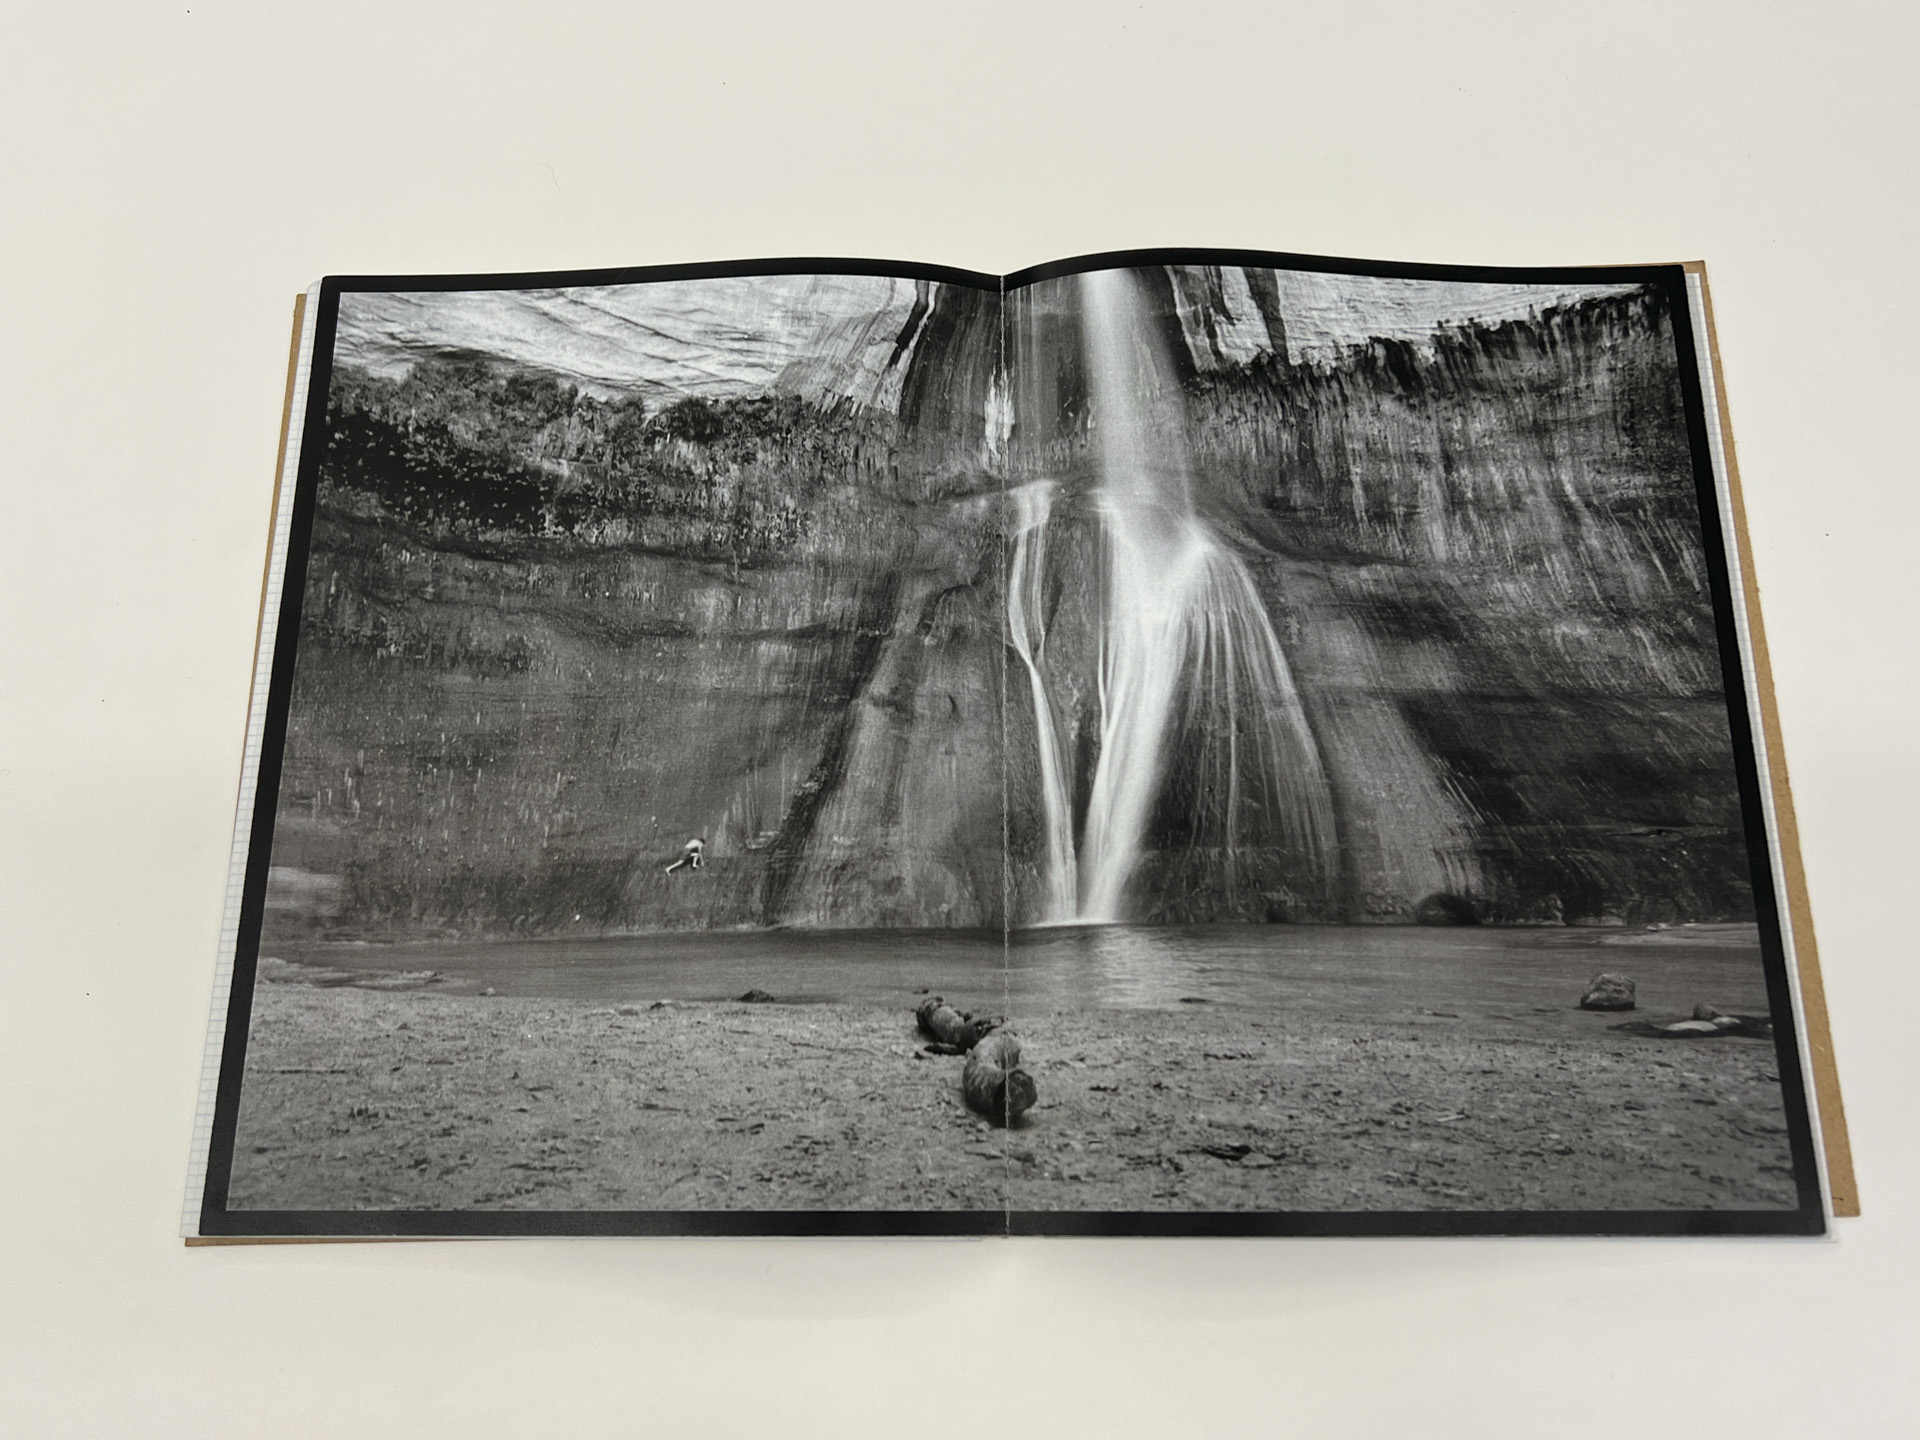 book opened to black and white waterfall outdoor scene